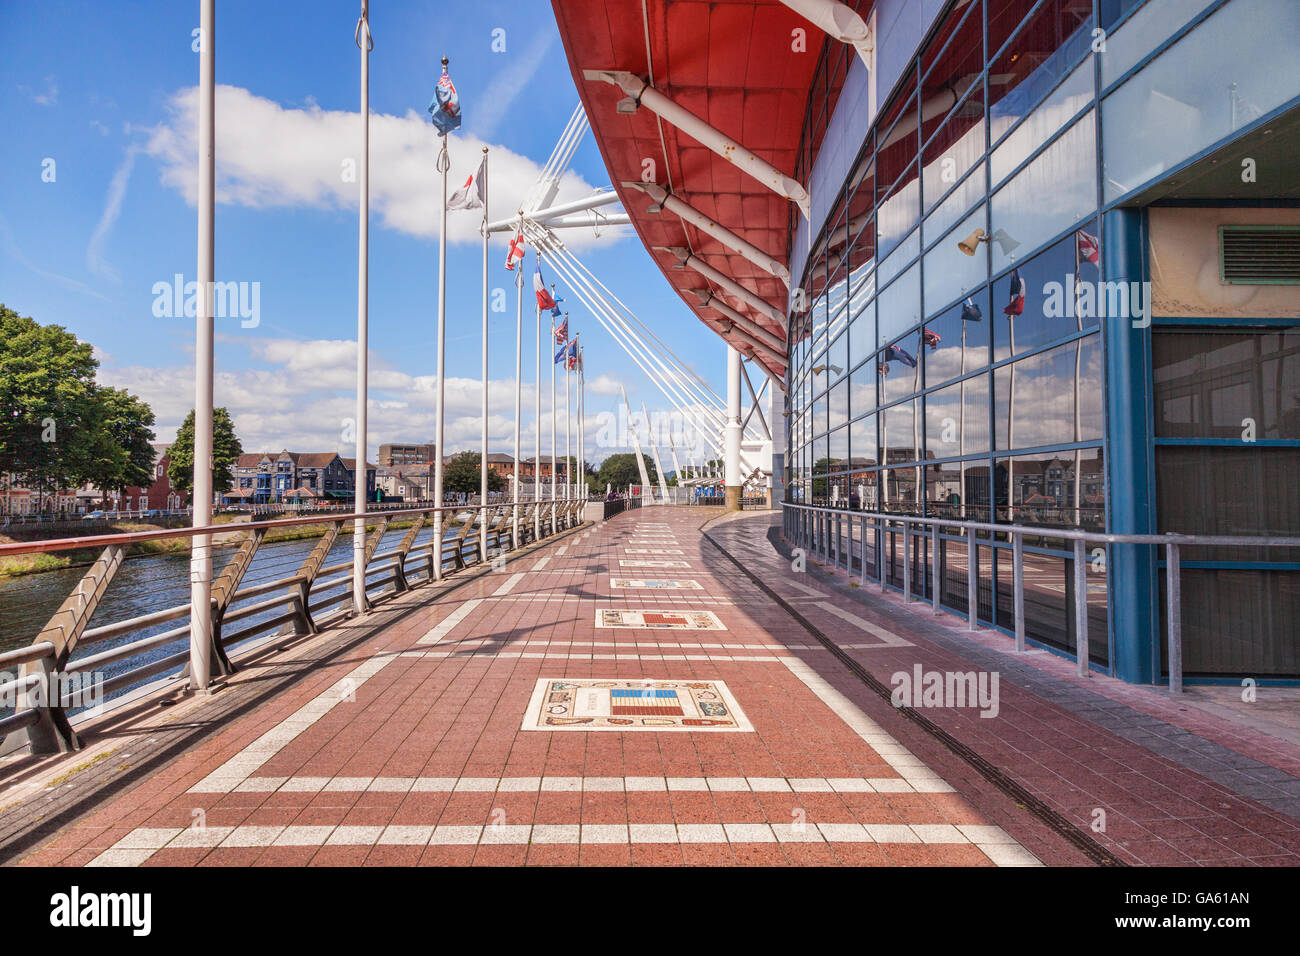 Cardiff, Wales: 27 June 2016 - The Boardwalk, Millennium Stadium, and the River Taff. Stock Photo